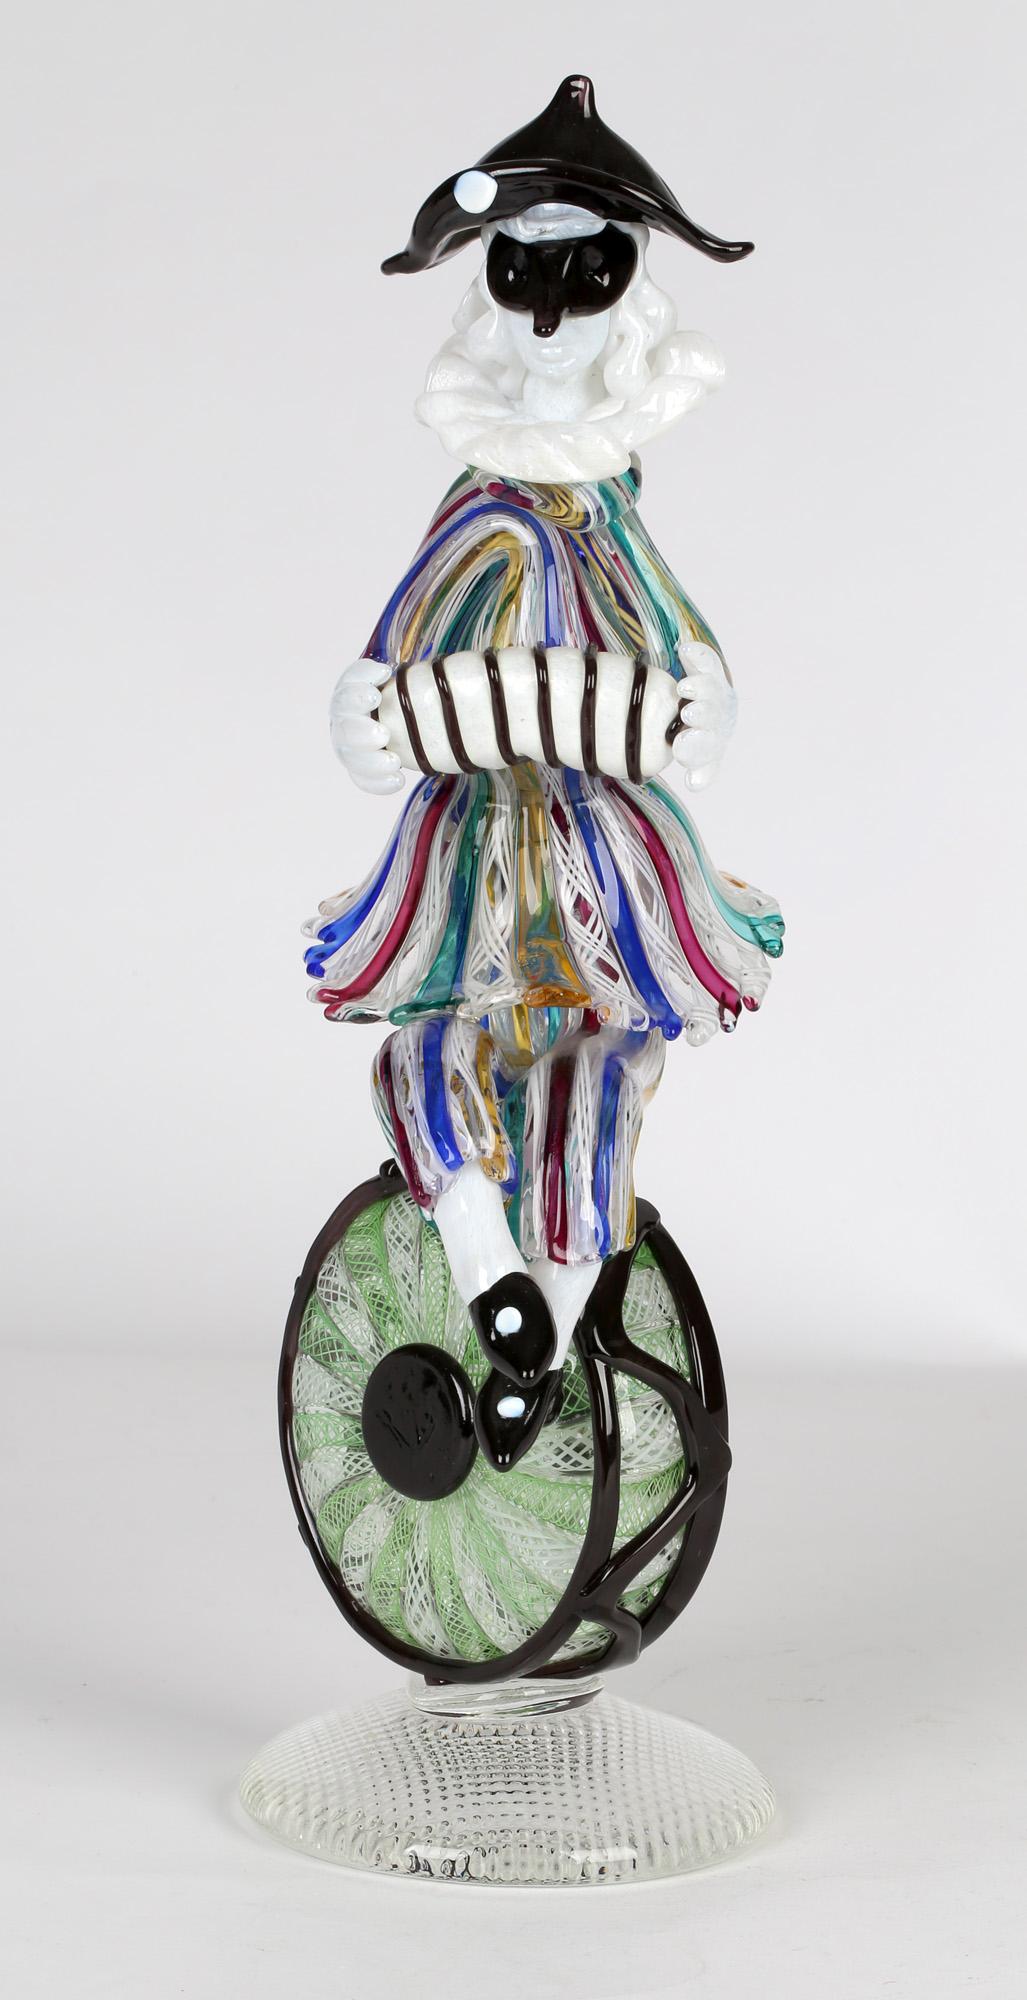 Blown Glass Franco Toffolo Commedia Dell'Arte Glass Clown Figure Playing A Squeeze Box